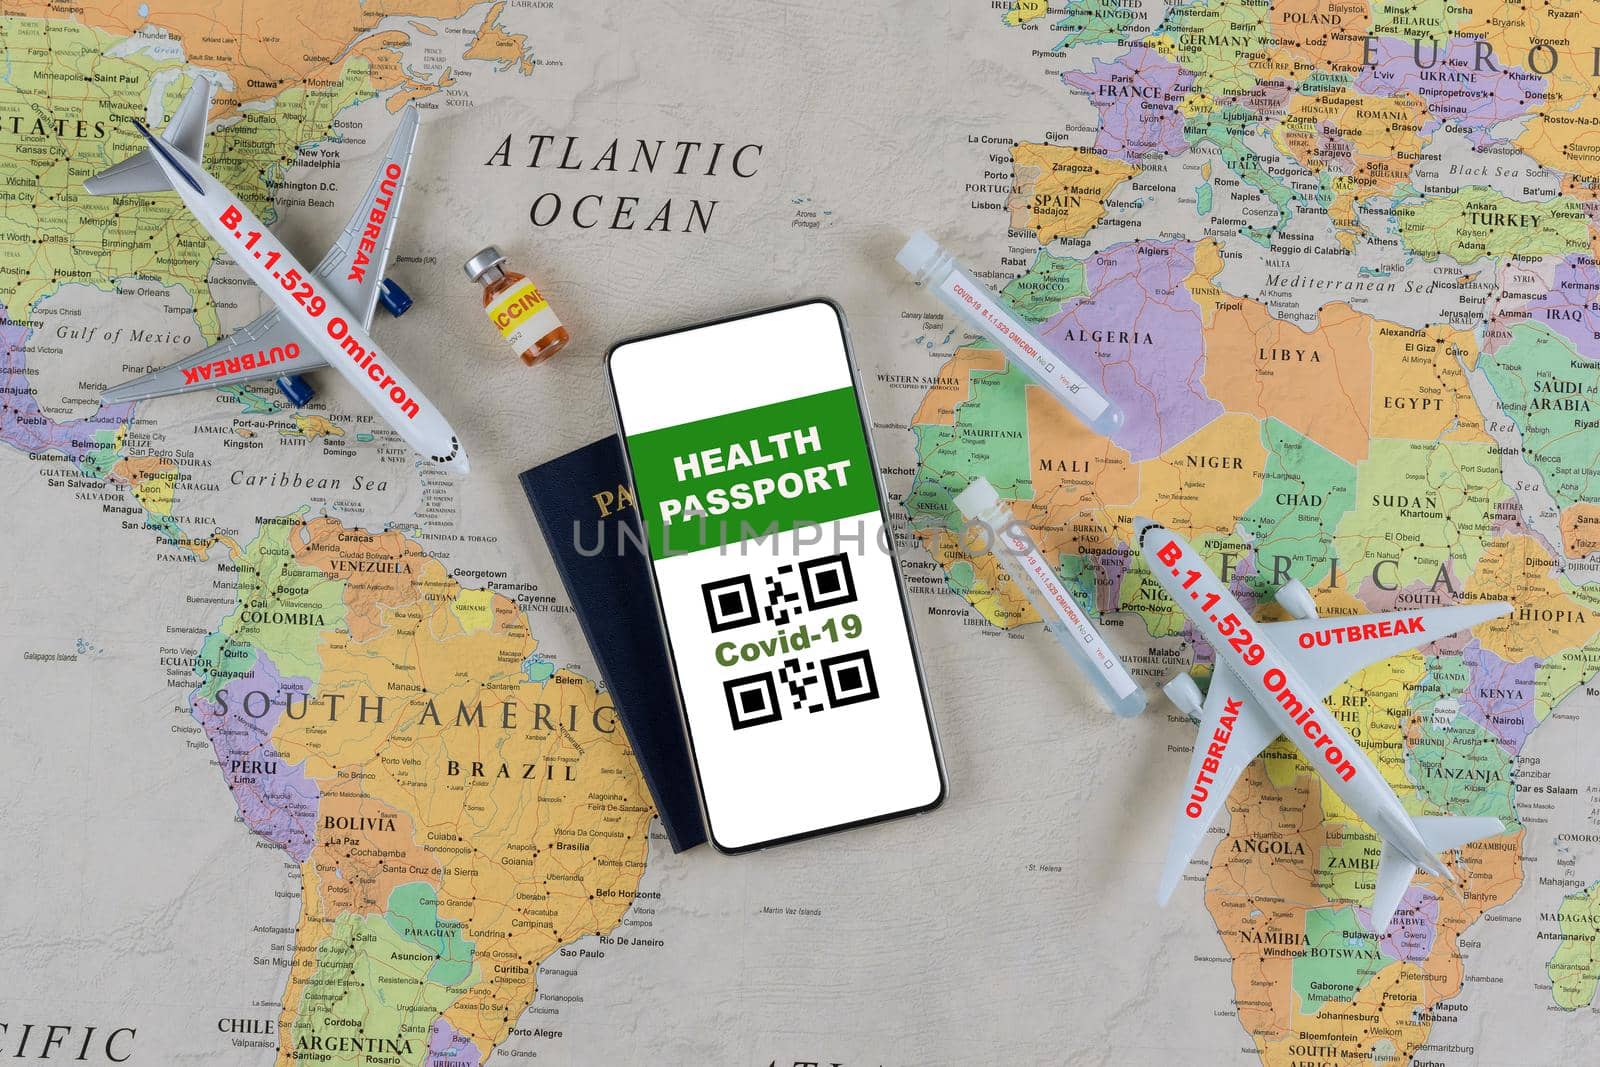 Smartphone with a digital of Covid-19 health vaccination passport a tube containing a swab sample for South African variant with new mutation coronavirus Omicron